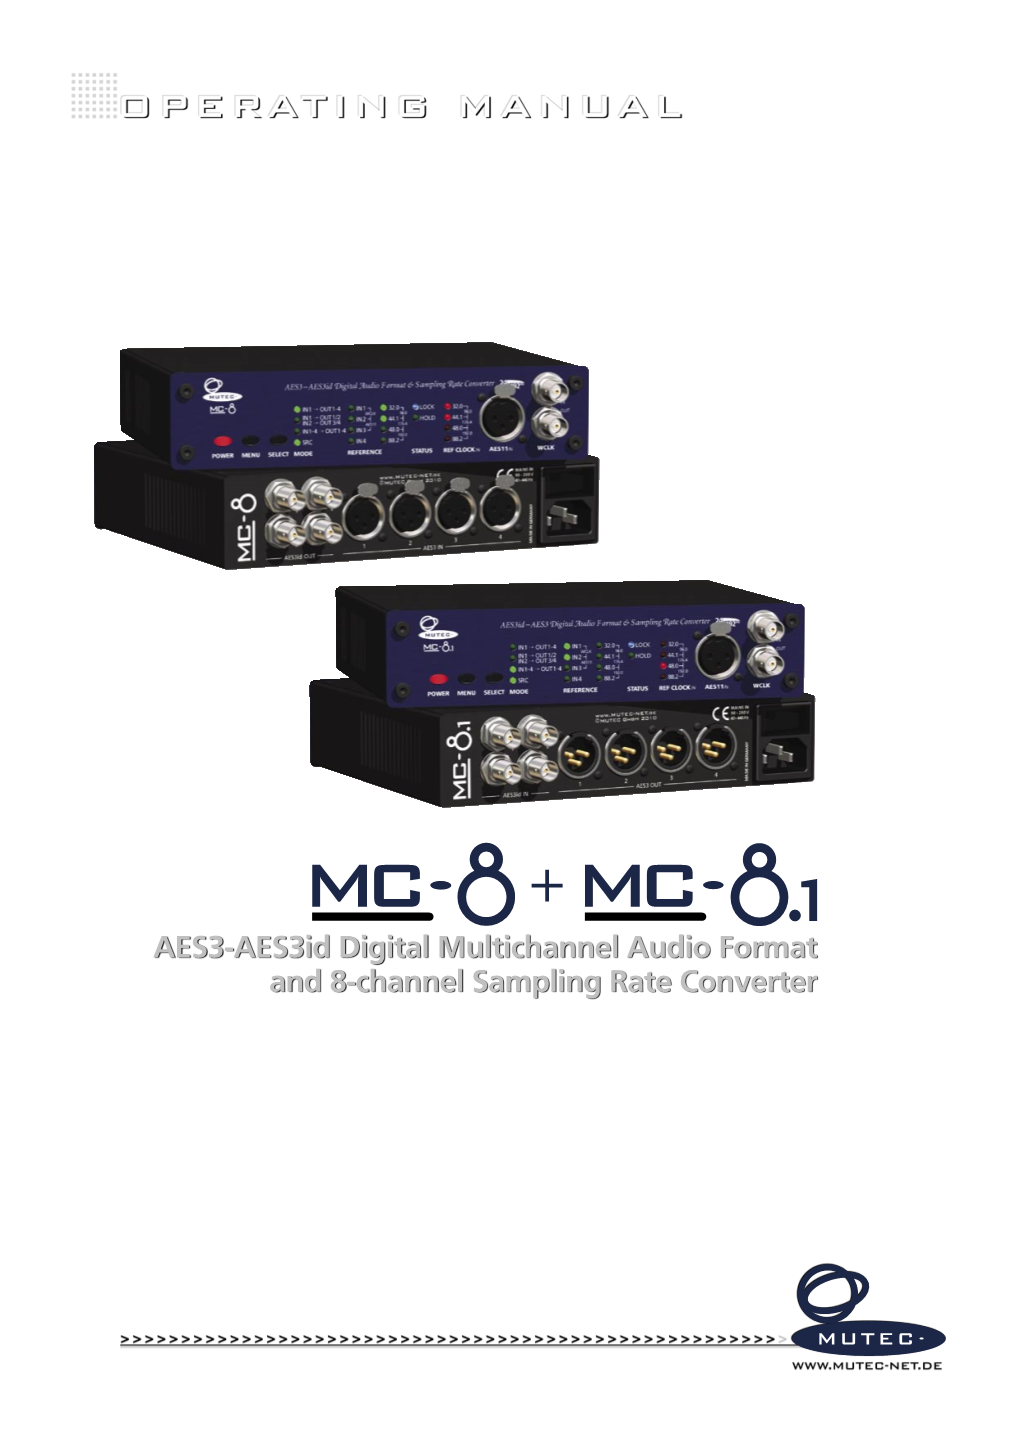 AES3-Aes3id Digital Multichannel Audio Format and 8-Channel Sampling Rate Converter